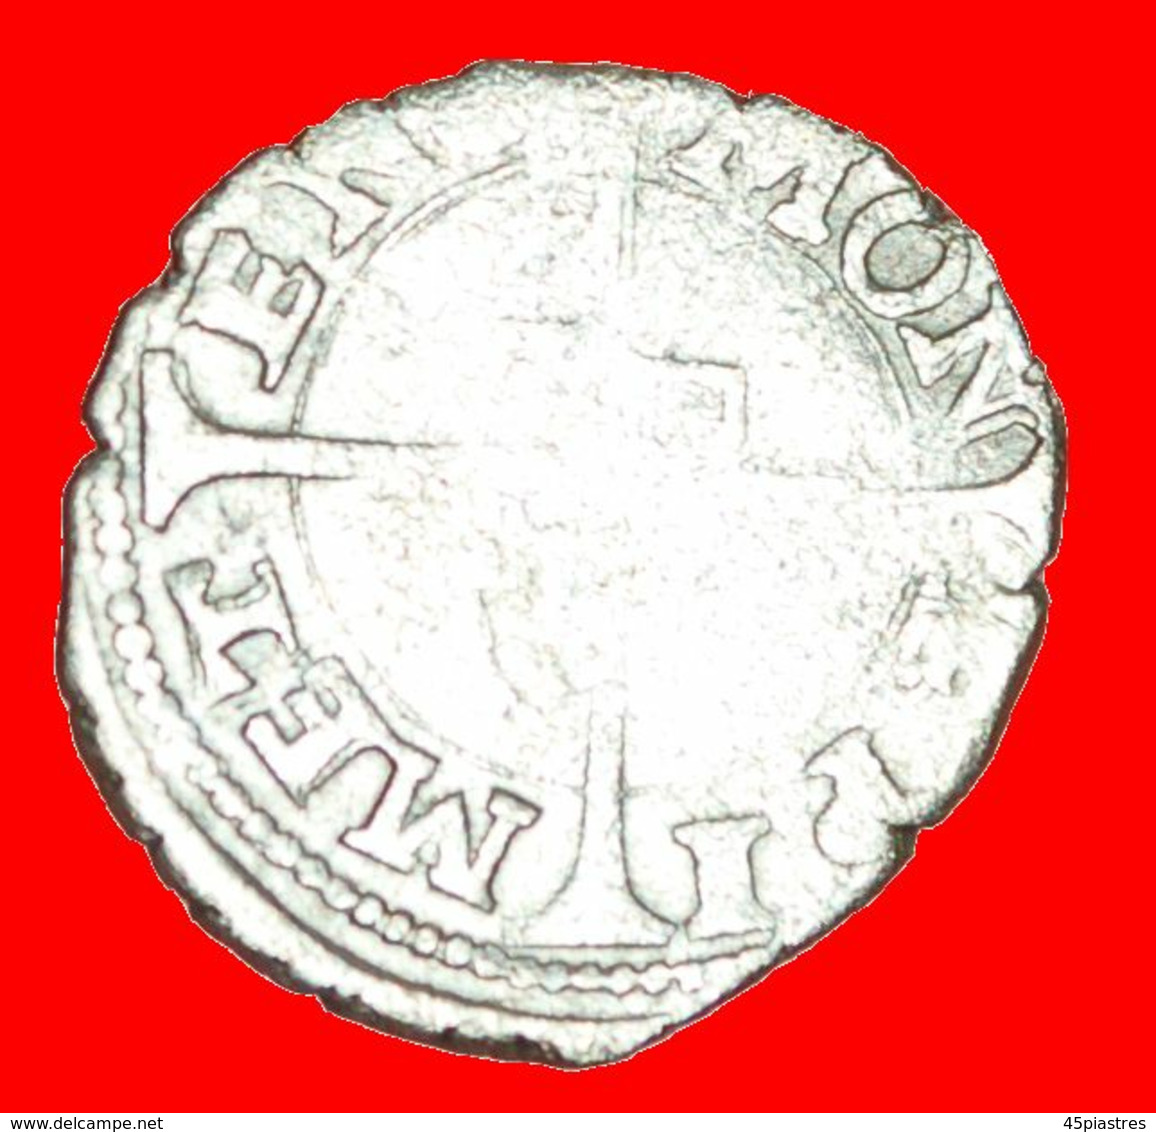 * METZ LORRAINE: FRANCE★BUGNE (1551-1555)! DISCOVERY COIN★ MEDAL ALIGNMENT ↑↑! RECENTLY PUBLISHED★LOW START★ NO RESERVE! - Varietà E Curiosità